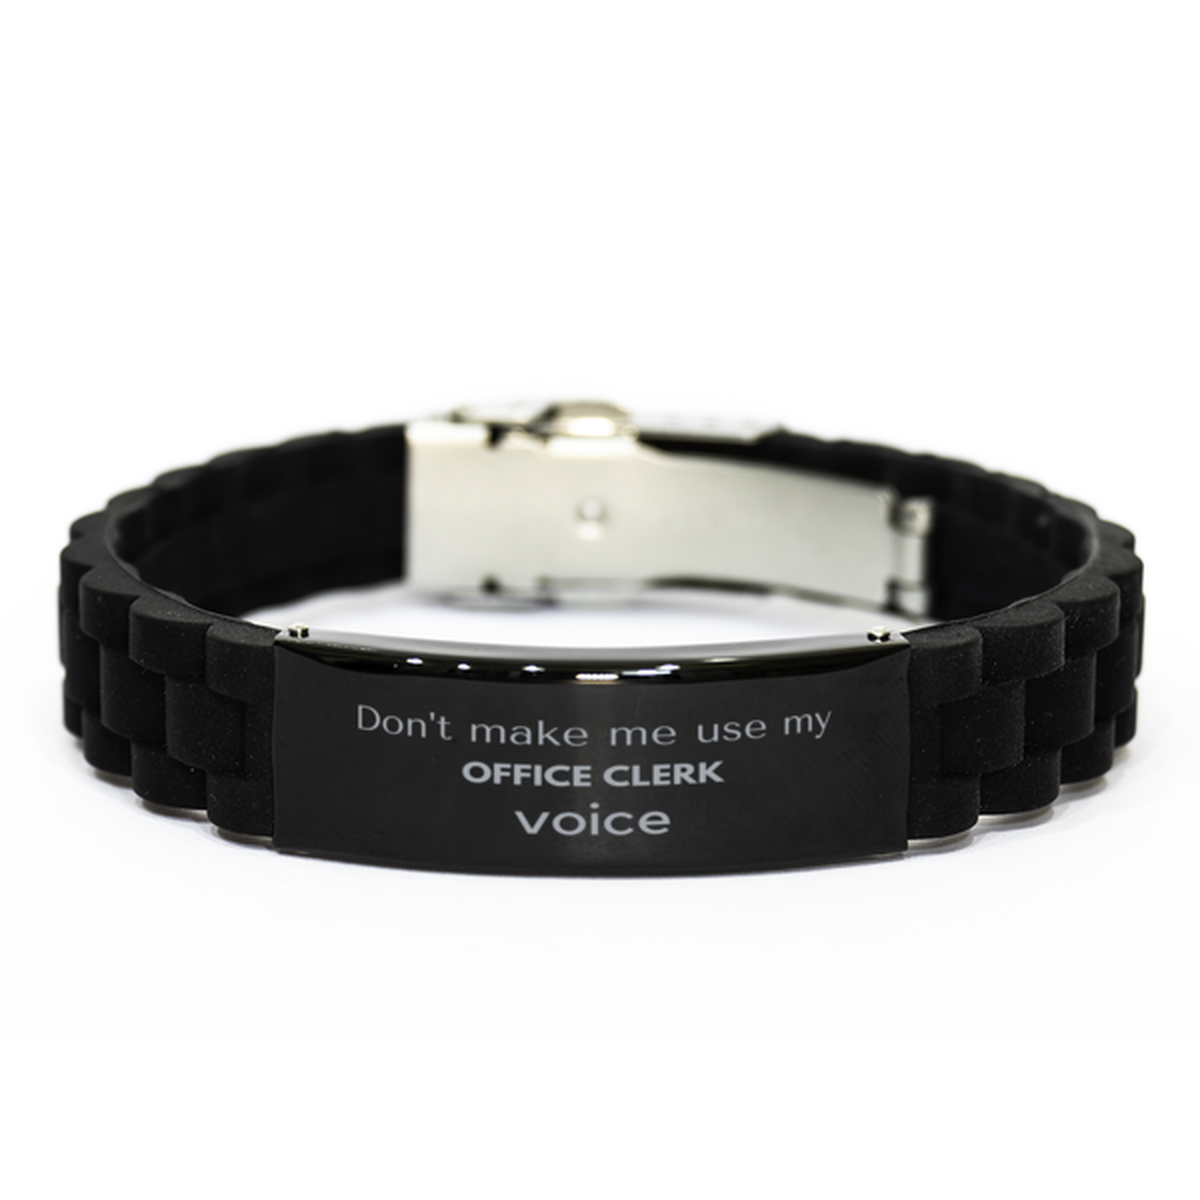 Don't make me use my Office Clerk voice, Sarcasm Office Clerk Gifts, Christmas Office Clerk Black Glidelock Clasp Bracelet Birthday Unique Gifts For Office Clerk Coworkers, Men, Women, Colleague, Friends